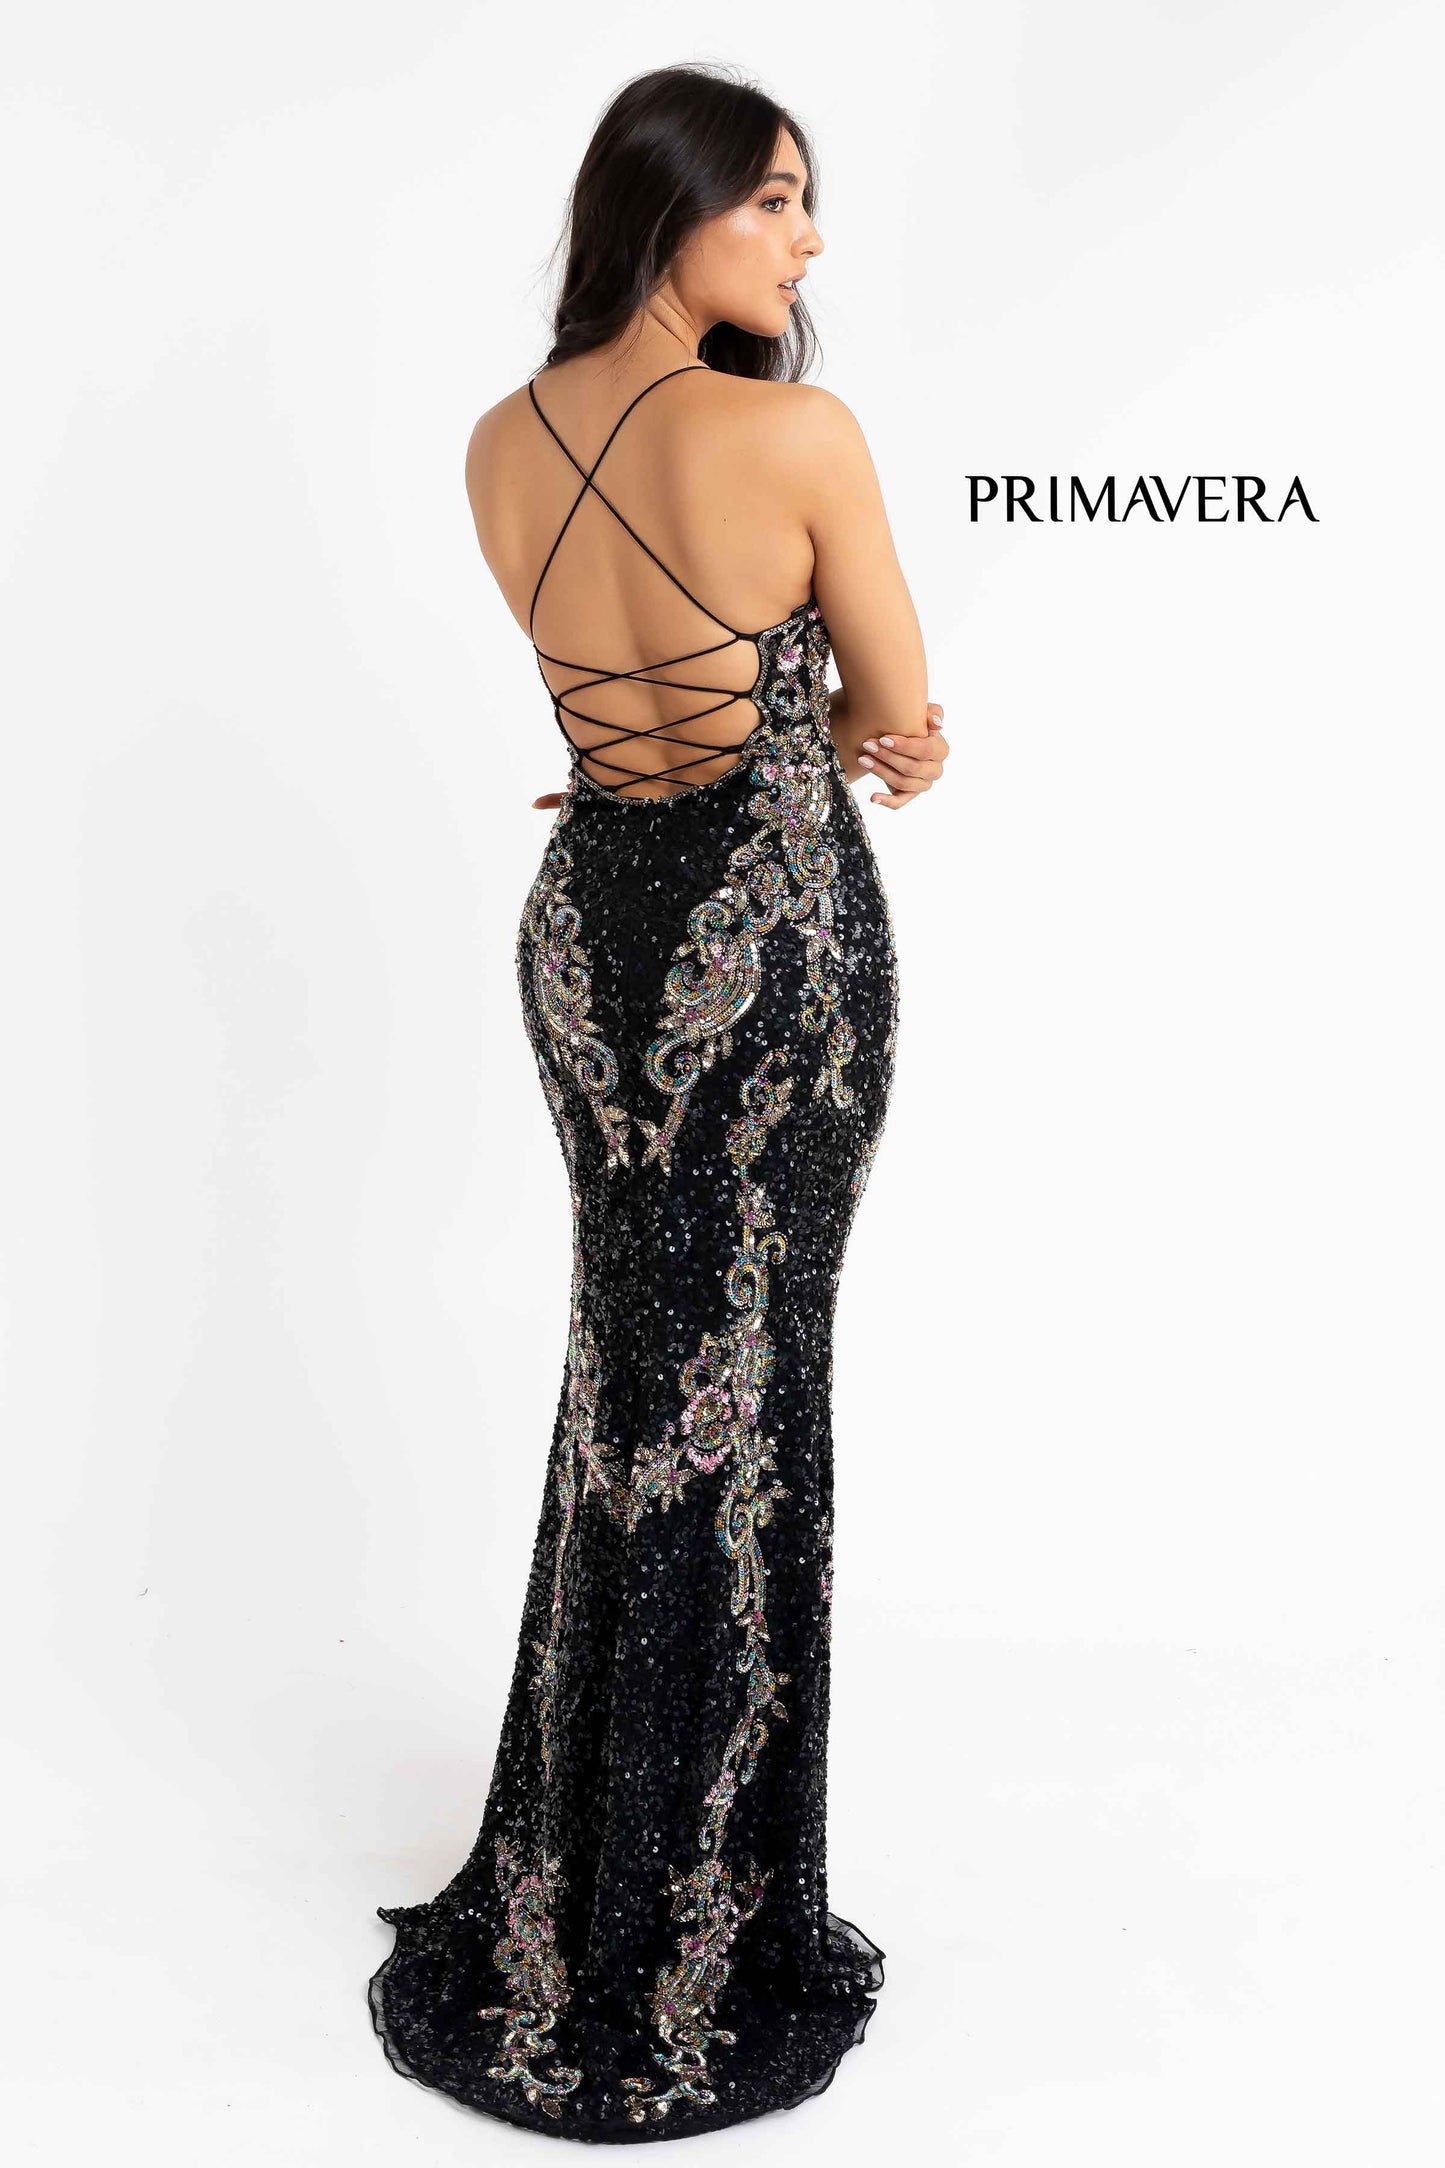 Primavera Couture 3211 black s a Long fitted sequin Embellished Formal Evening Gown. This Prom Dress Features a deep V Neck with an open Corset lace up back. Beaded & embellished elegant scroll pattern accentuate curves. Fully beaded prom dress with floral pattern and side slit. Long Sequin Gown featuring a v neckline. slit in the fitted skirt, Slit in Thigh. Stunning Pageant Dress, Prom Gown & More!